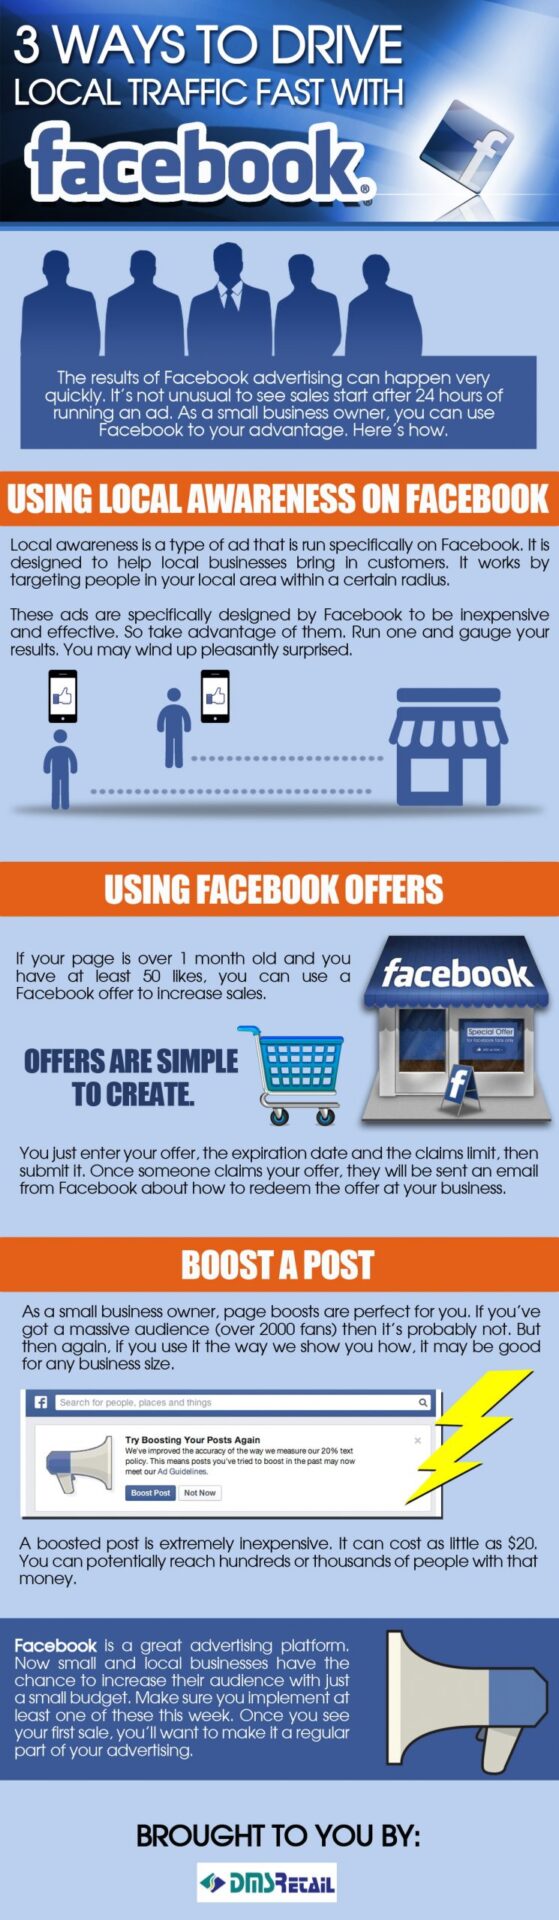 Drive Local Traffic with Facebook